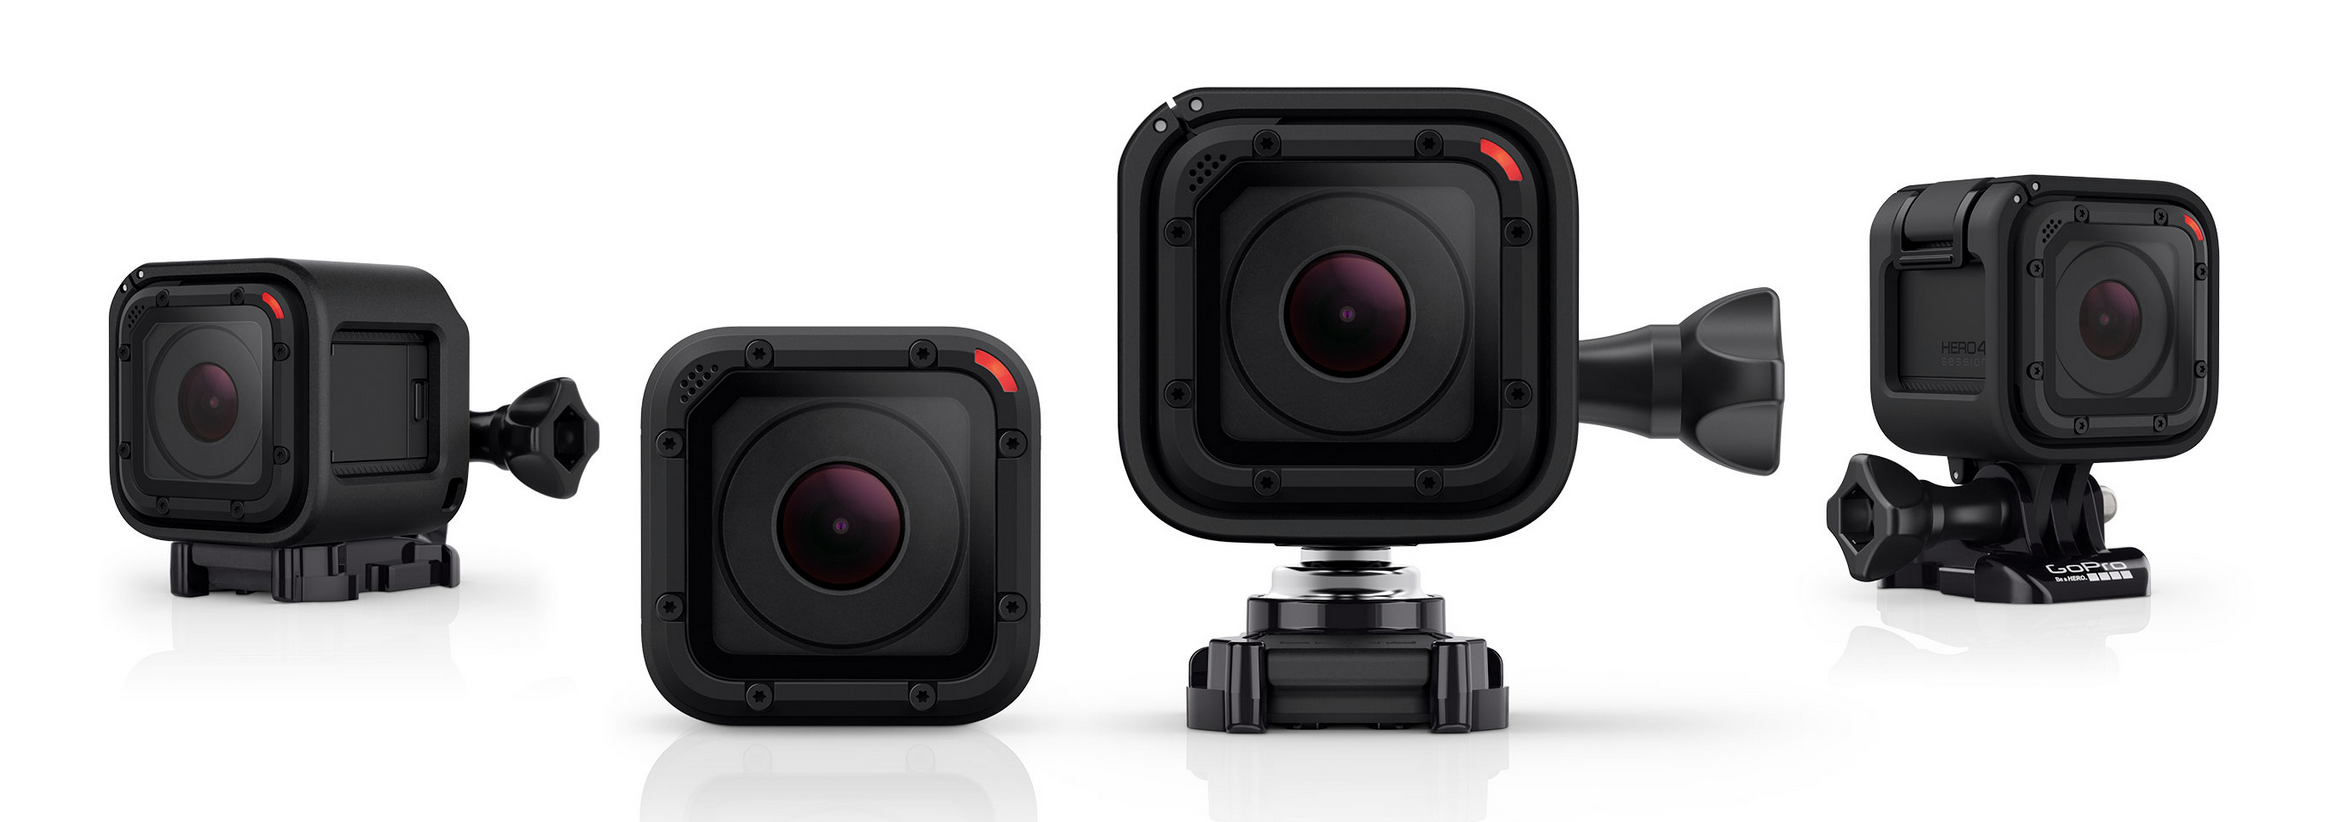 New GoPro Hero4 Session Action Camera